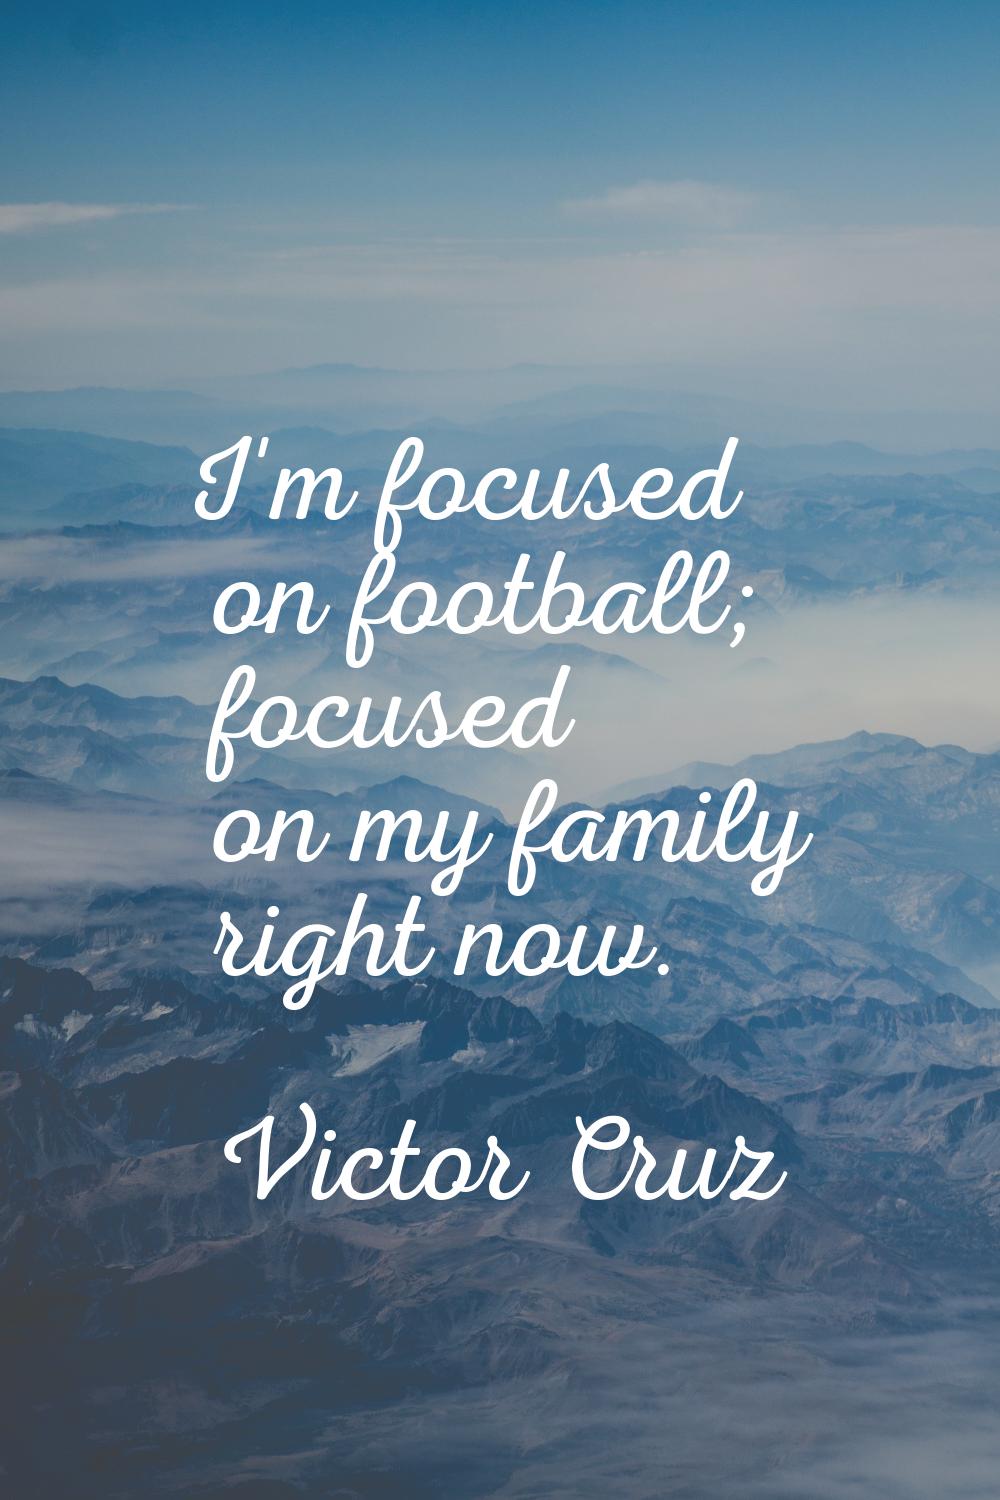 I'm focused on football; focused on my family right now.